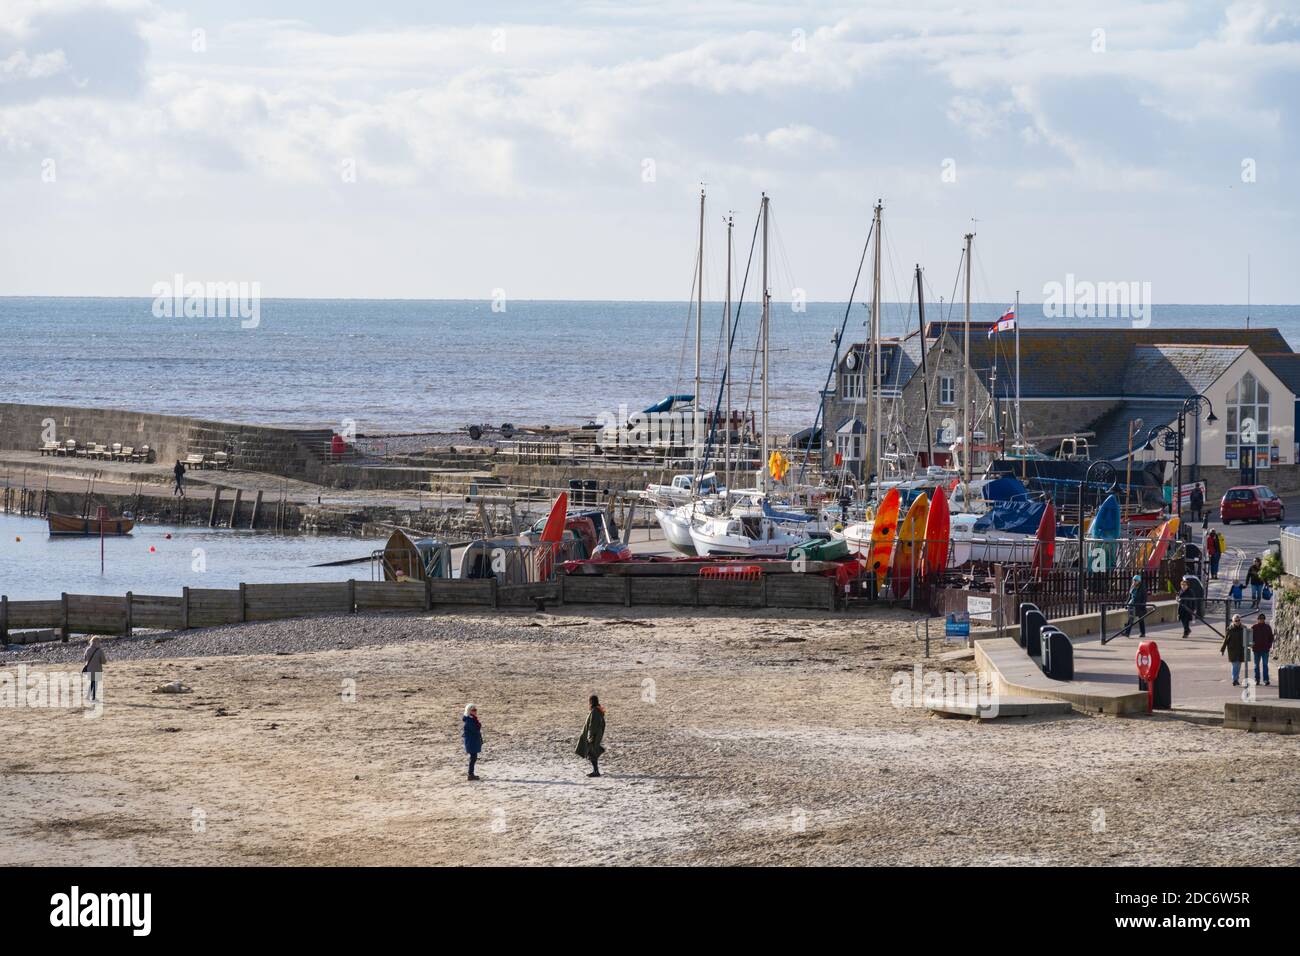 Lyme Regis, Dorset, UK. 19th Nov, 2020. UK Weather: Bright sunny spells at the seaside resort of Lyme Regis. Locals enjoy a brief respite from the dull and wet weather. Credit: Celia McMahon/Alamy Live News Stock Photo